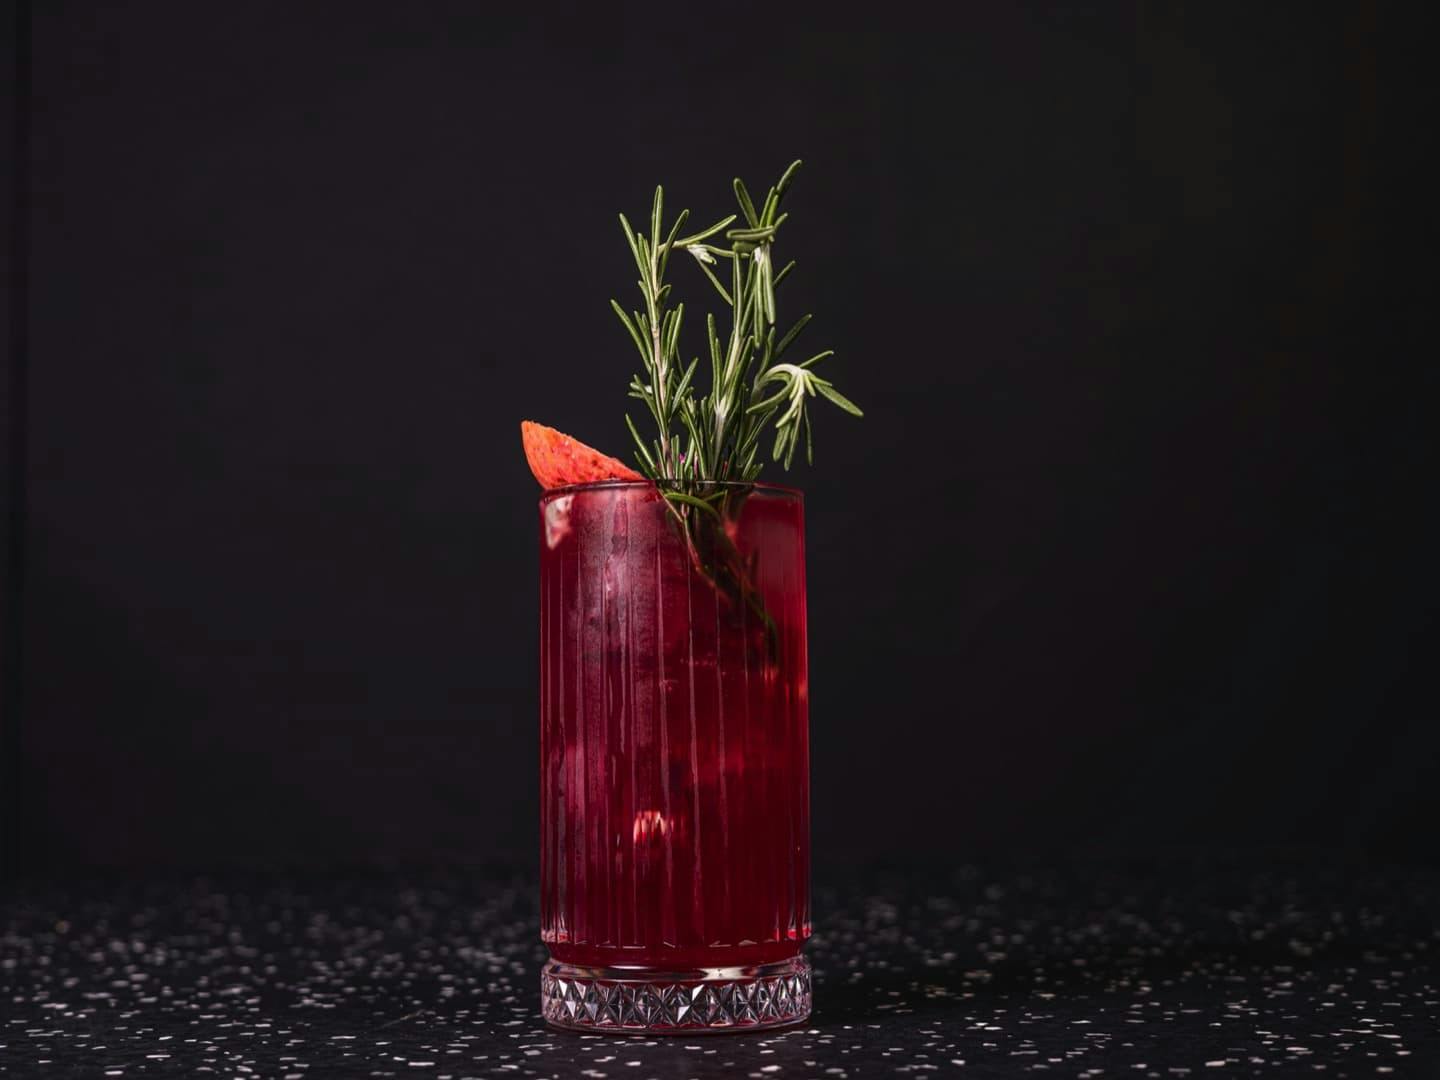 <p>The madness of bubbles combined with rosemary and pomegranate</p>
<p>Base: Soda infused with rosemary, pomegranate puree, lemon thyme syrup</p>